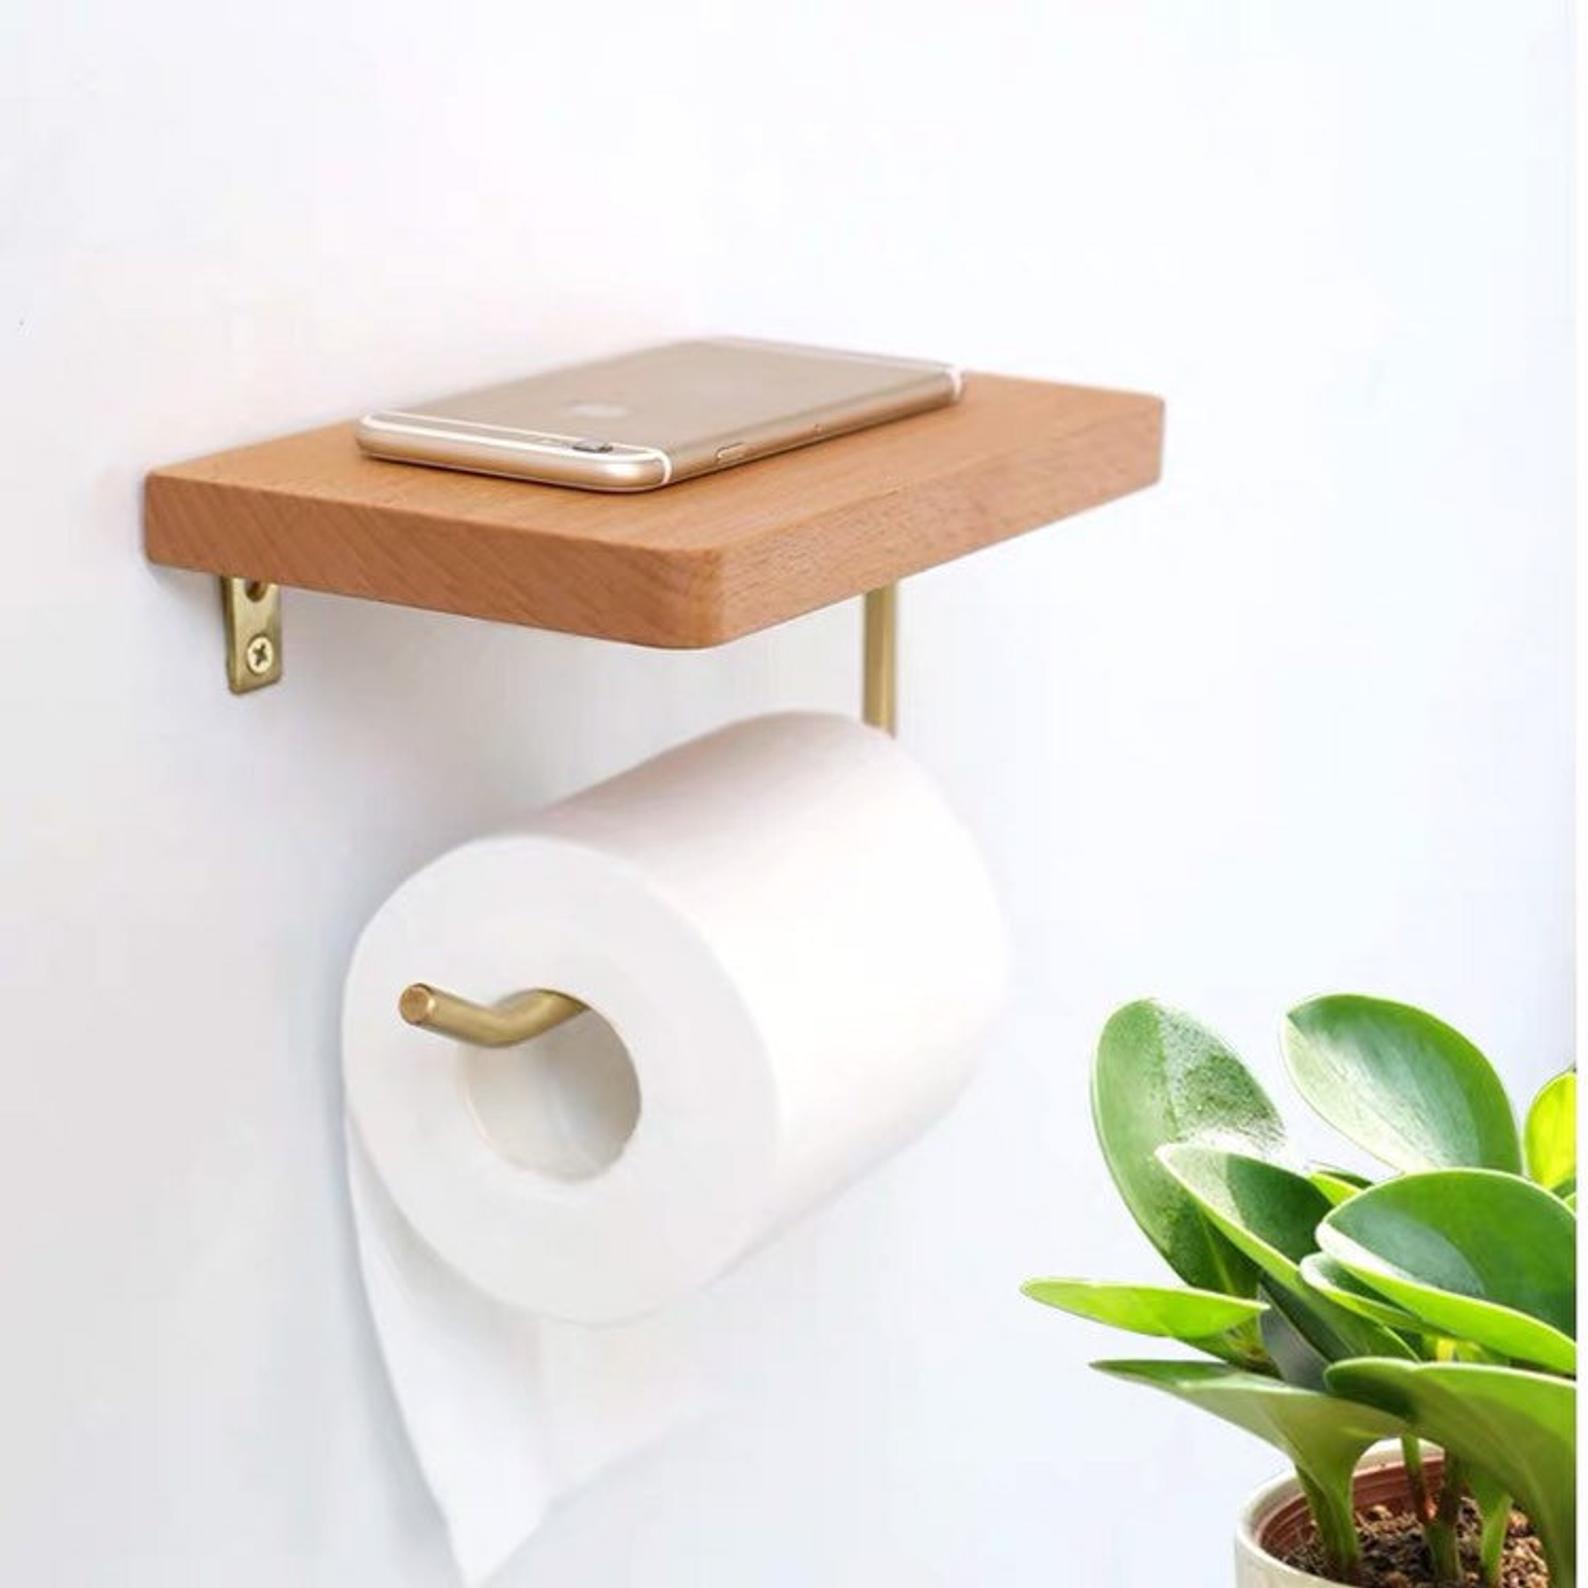 Toilet Tissue Holder Blue Roll Papers Stand Dispenser Home Kitchen Wall